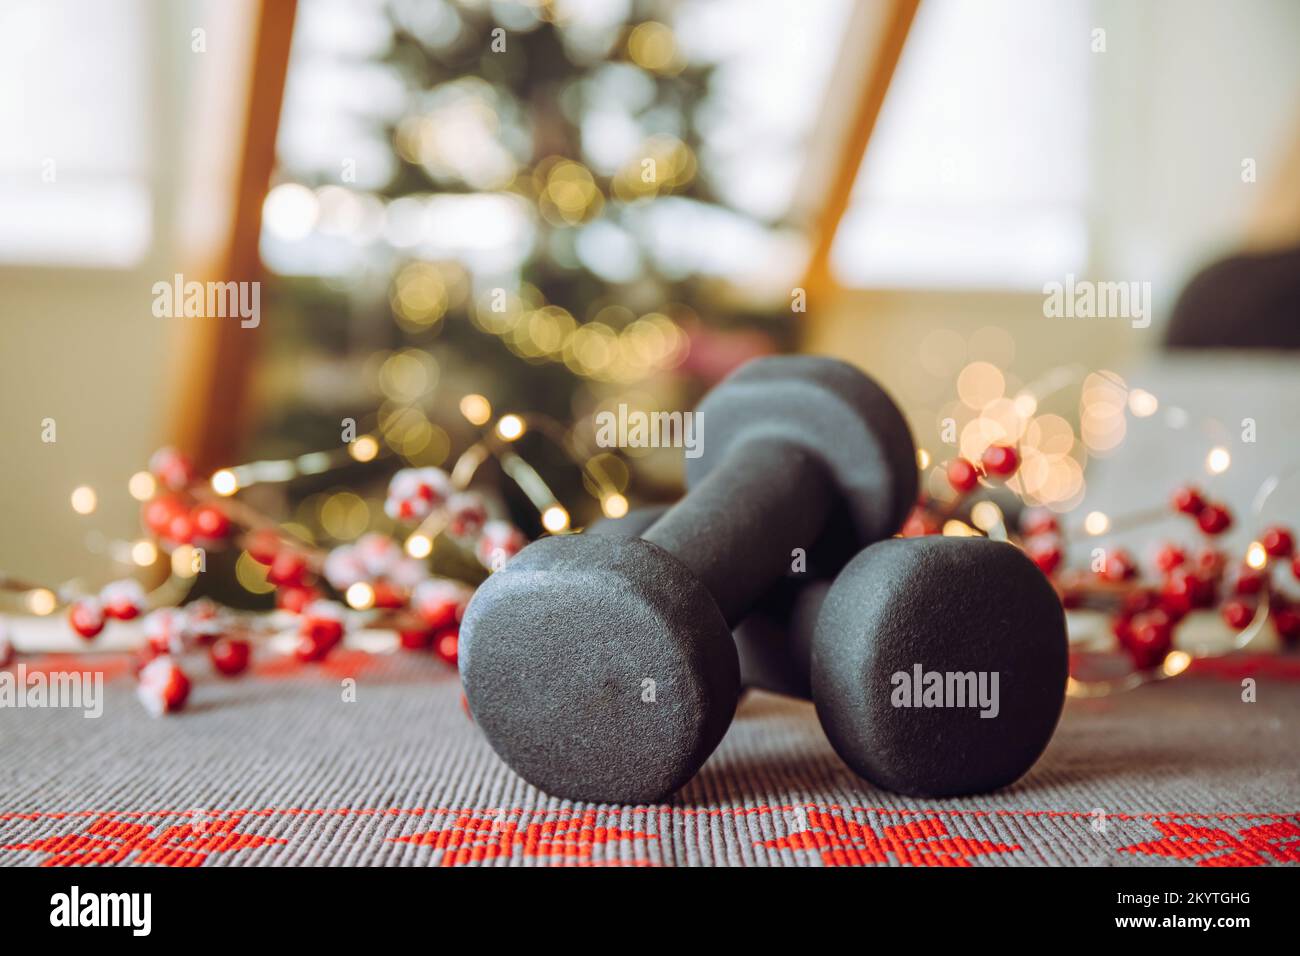 Healthy lifestyle during Christmas feasting period concept. Black dumbbells with Christmas ornaments blurred Christmas tree with Christmas lights on. Stock Photo